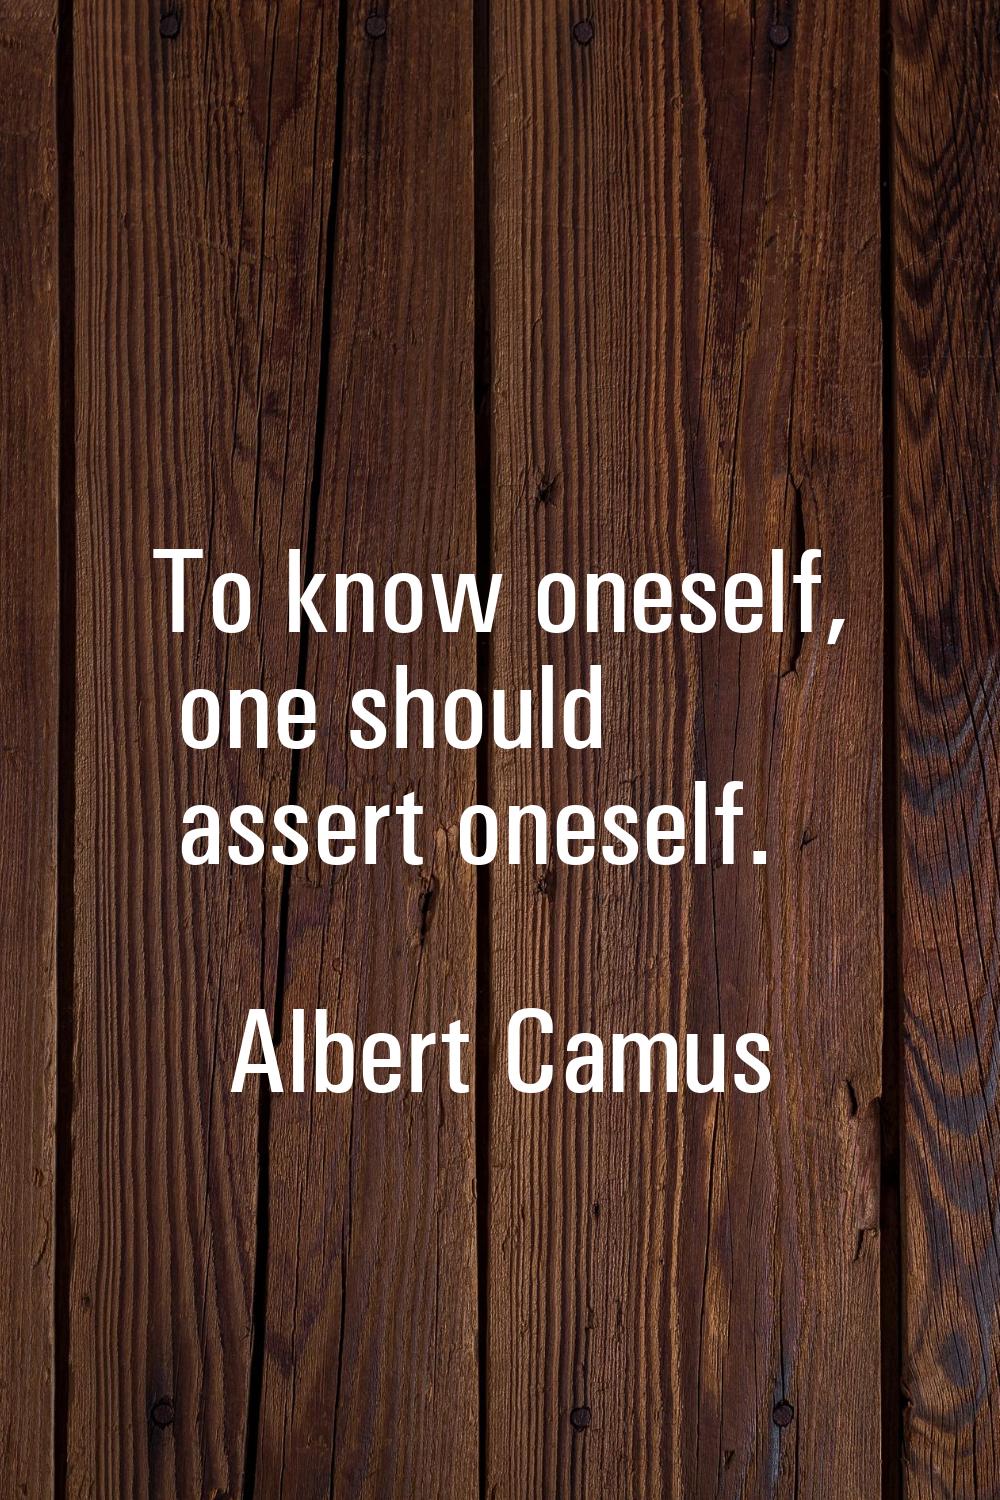 To know oneself, one should assert oneself.